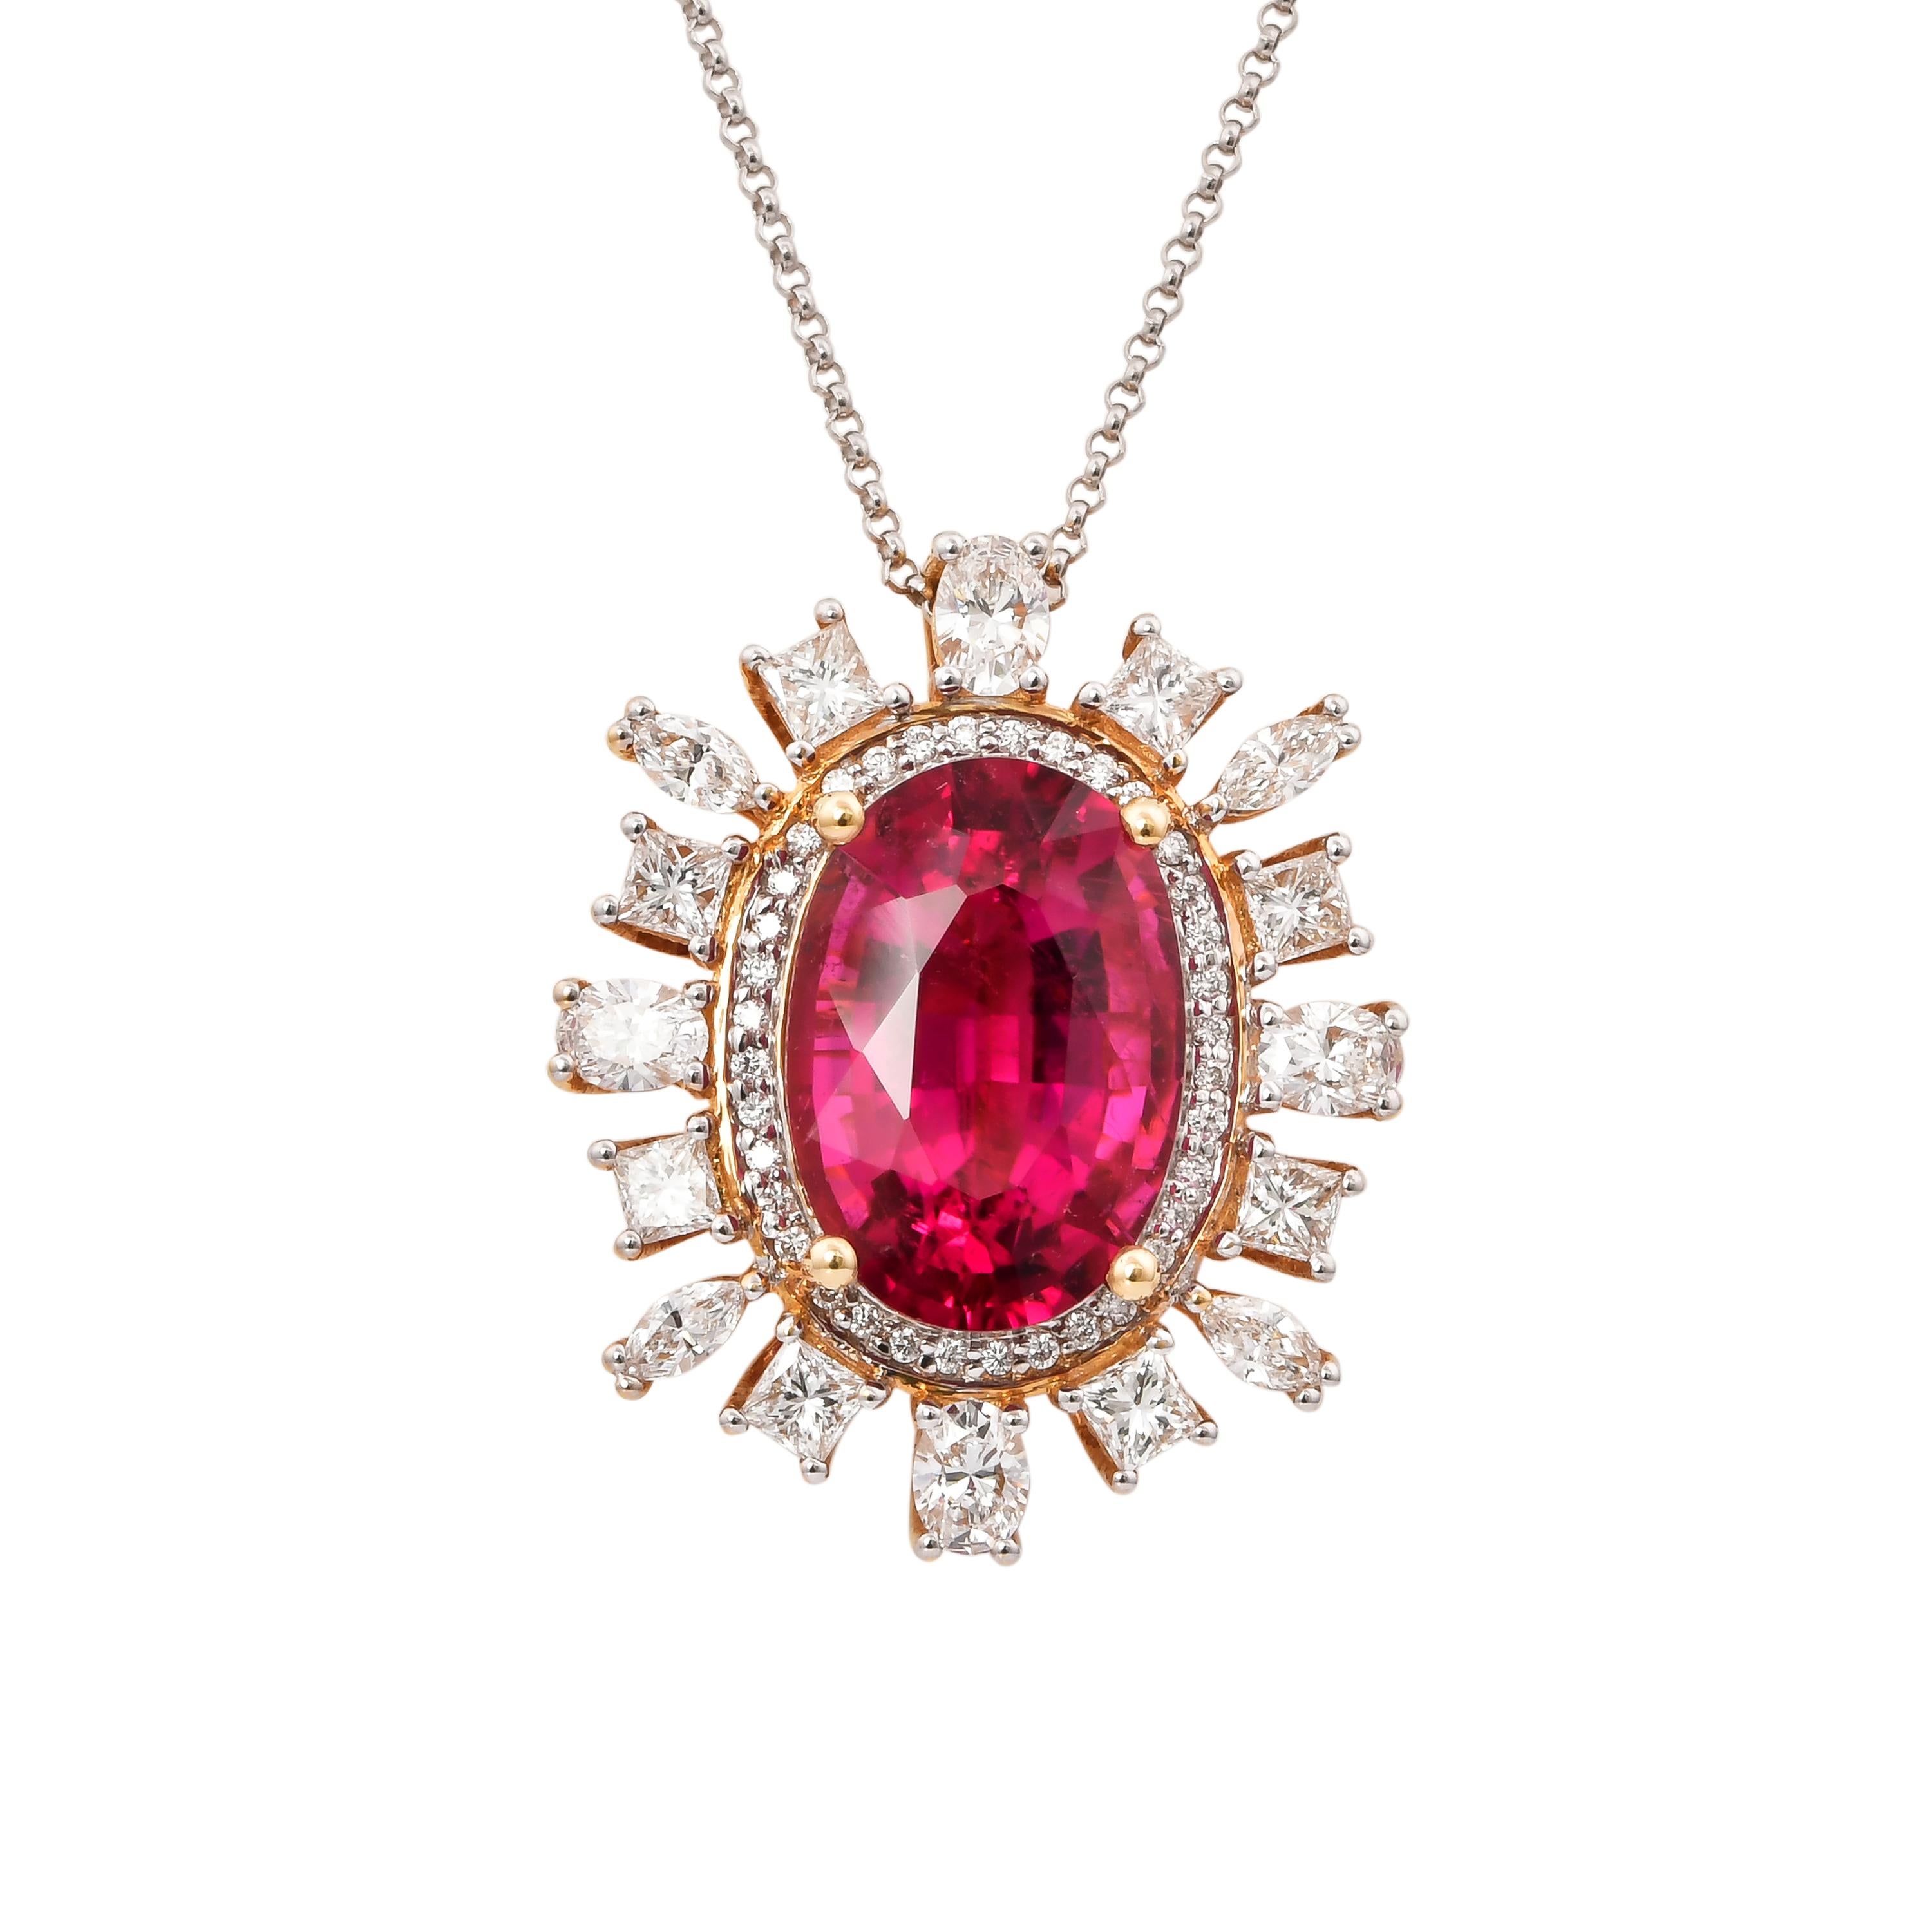 This collection features the most radiant Rubellite Tourmalines. These gemstones show a magnificent and regal deep red colour, and the yellow gold and diamond accents makes these pieces a true showstopper. 

Classic Rubellite tourmaline pendant in